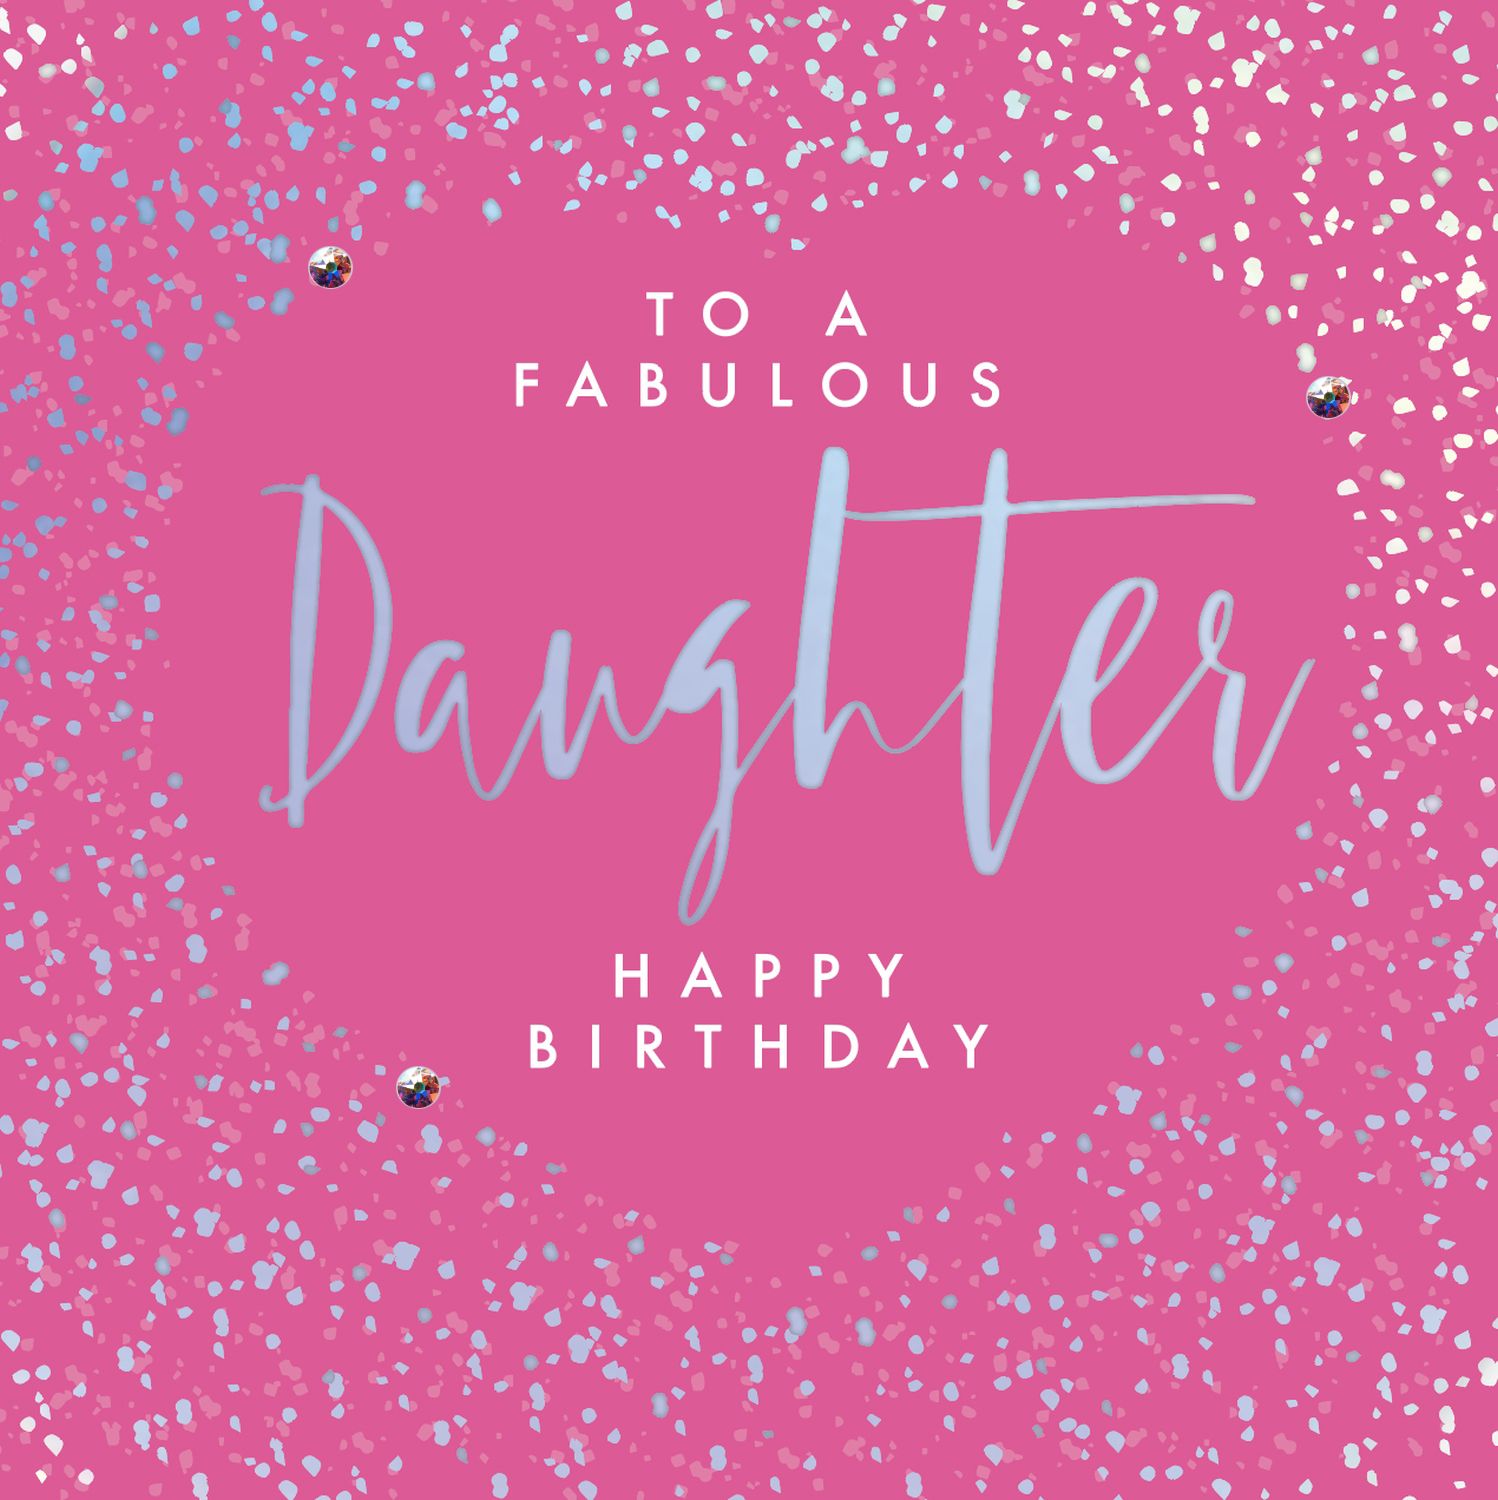 Printable Birthday Cards For Daughter